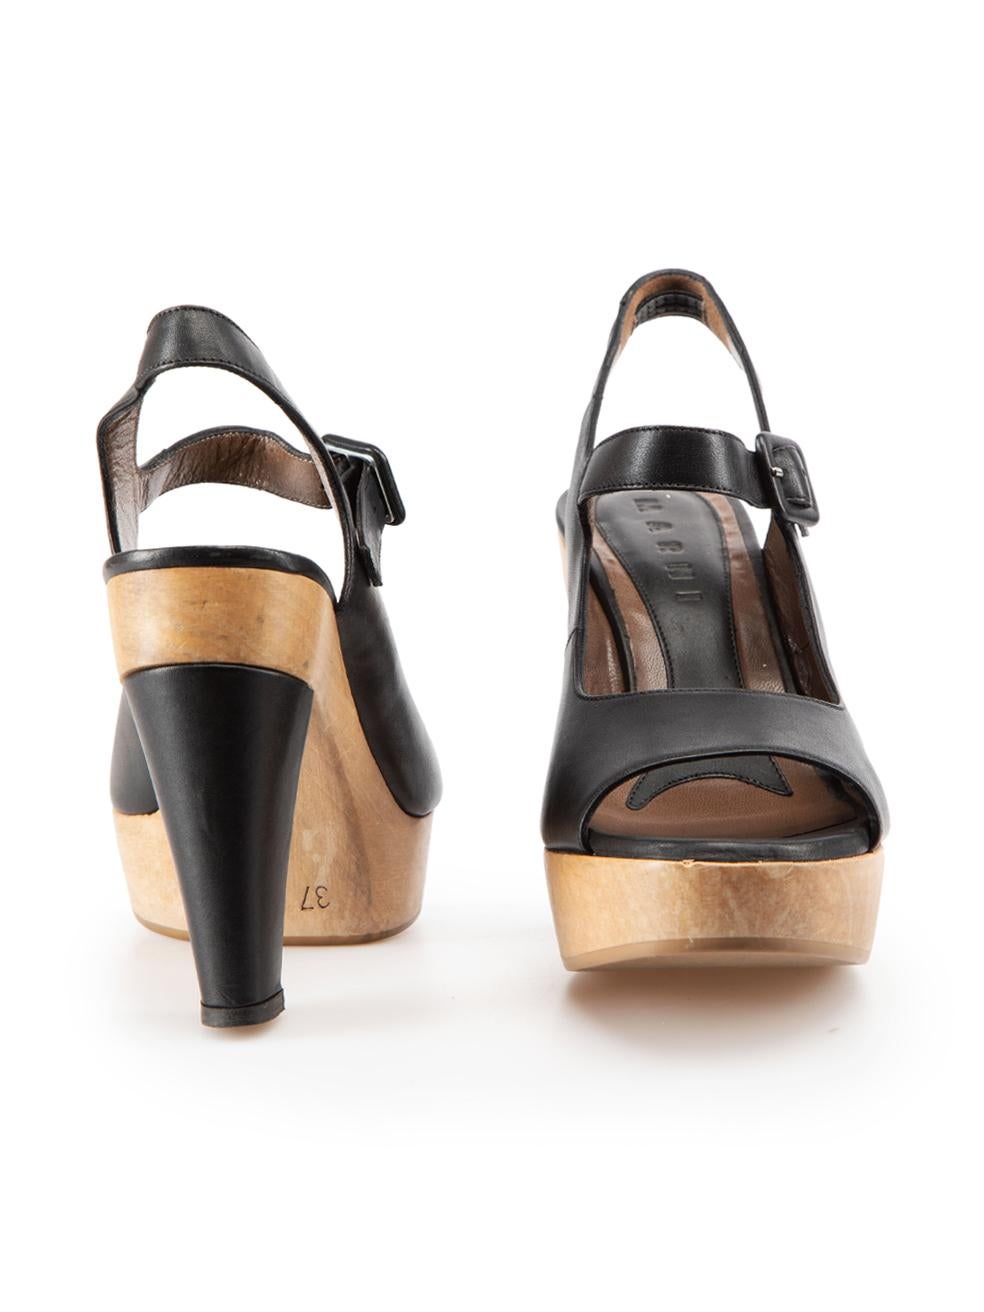 Marni Black Leather Wood Platform Sandals Size IT 37 In Excellent Condition For Sale In London, GB